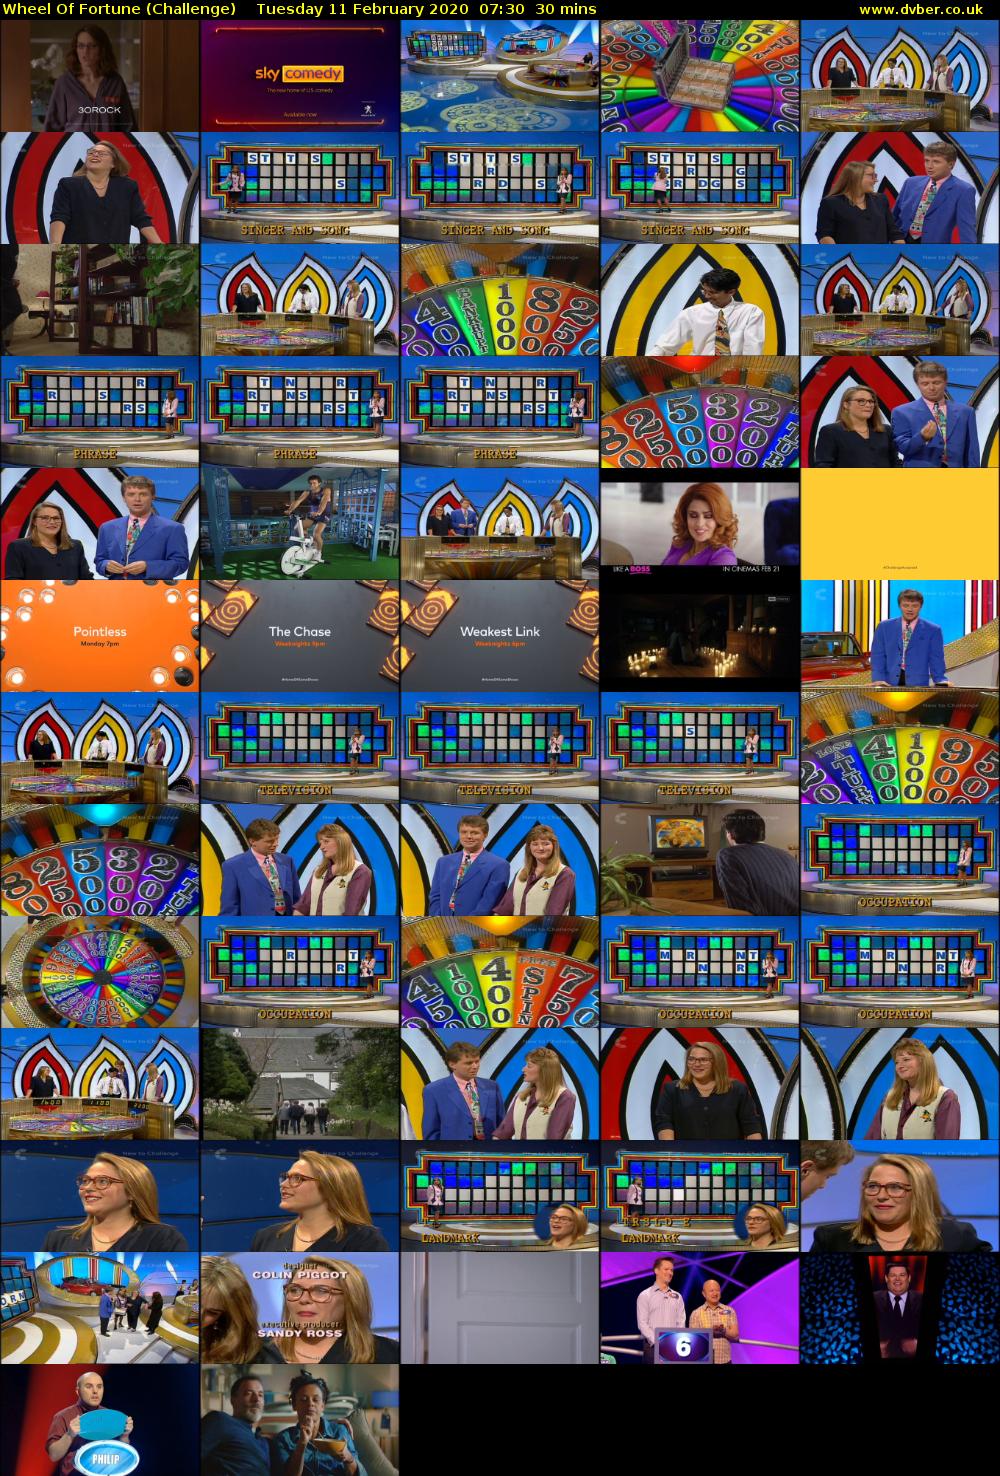 Wheel Of Fortune (Challenge) Tuesday 11 February 2020 07:30 - 08:00